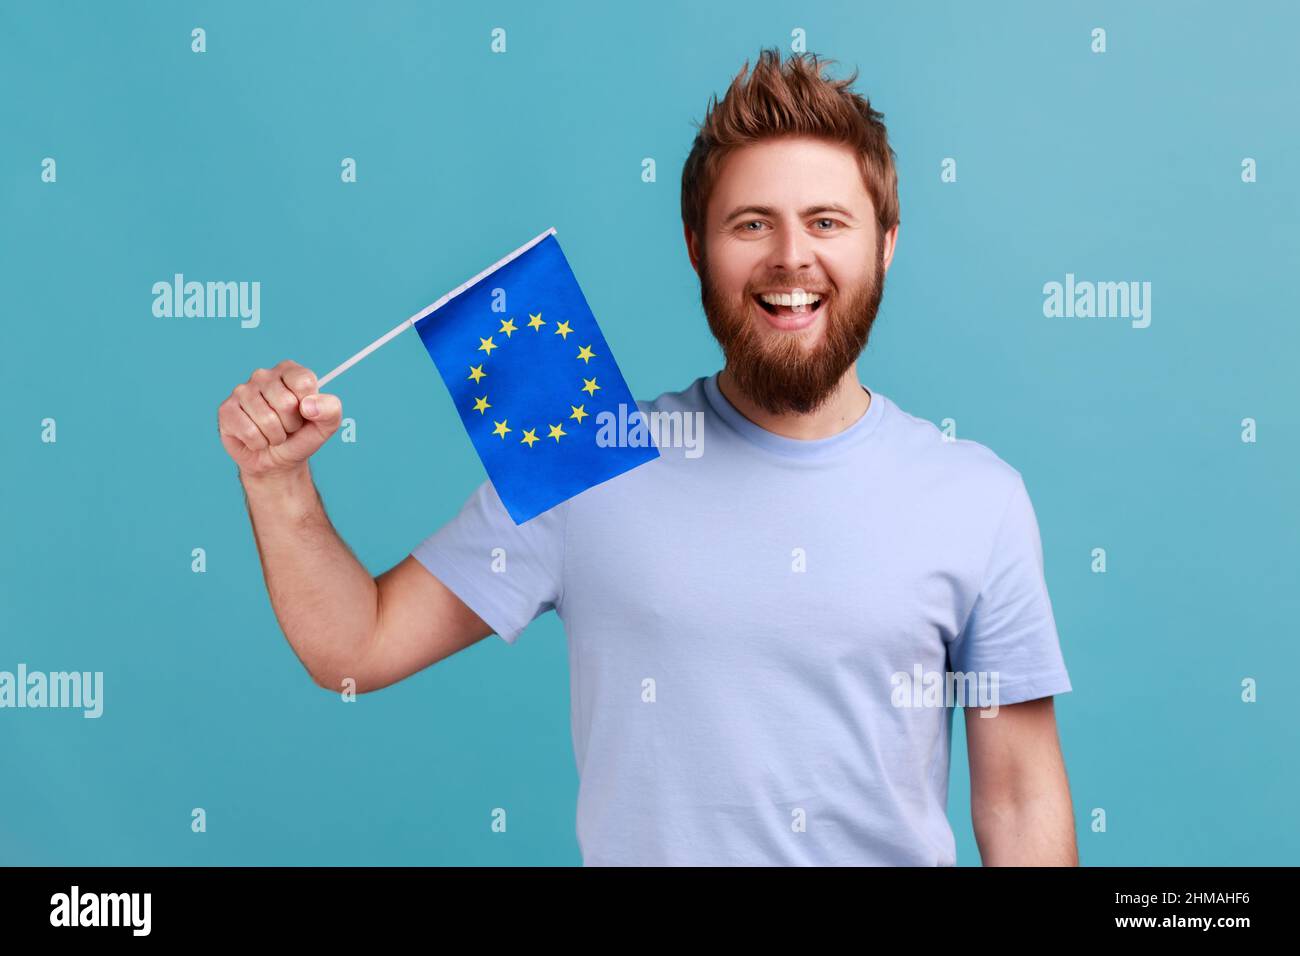 Portrait of excited bearded man smiling broadly and holding flag of European Union, symbol of Europe, EU association and community. Indoor studio shot isolated on blue background. Stock Photo